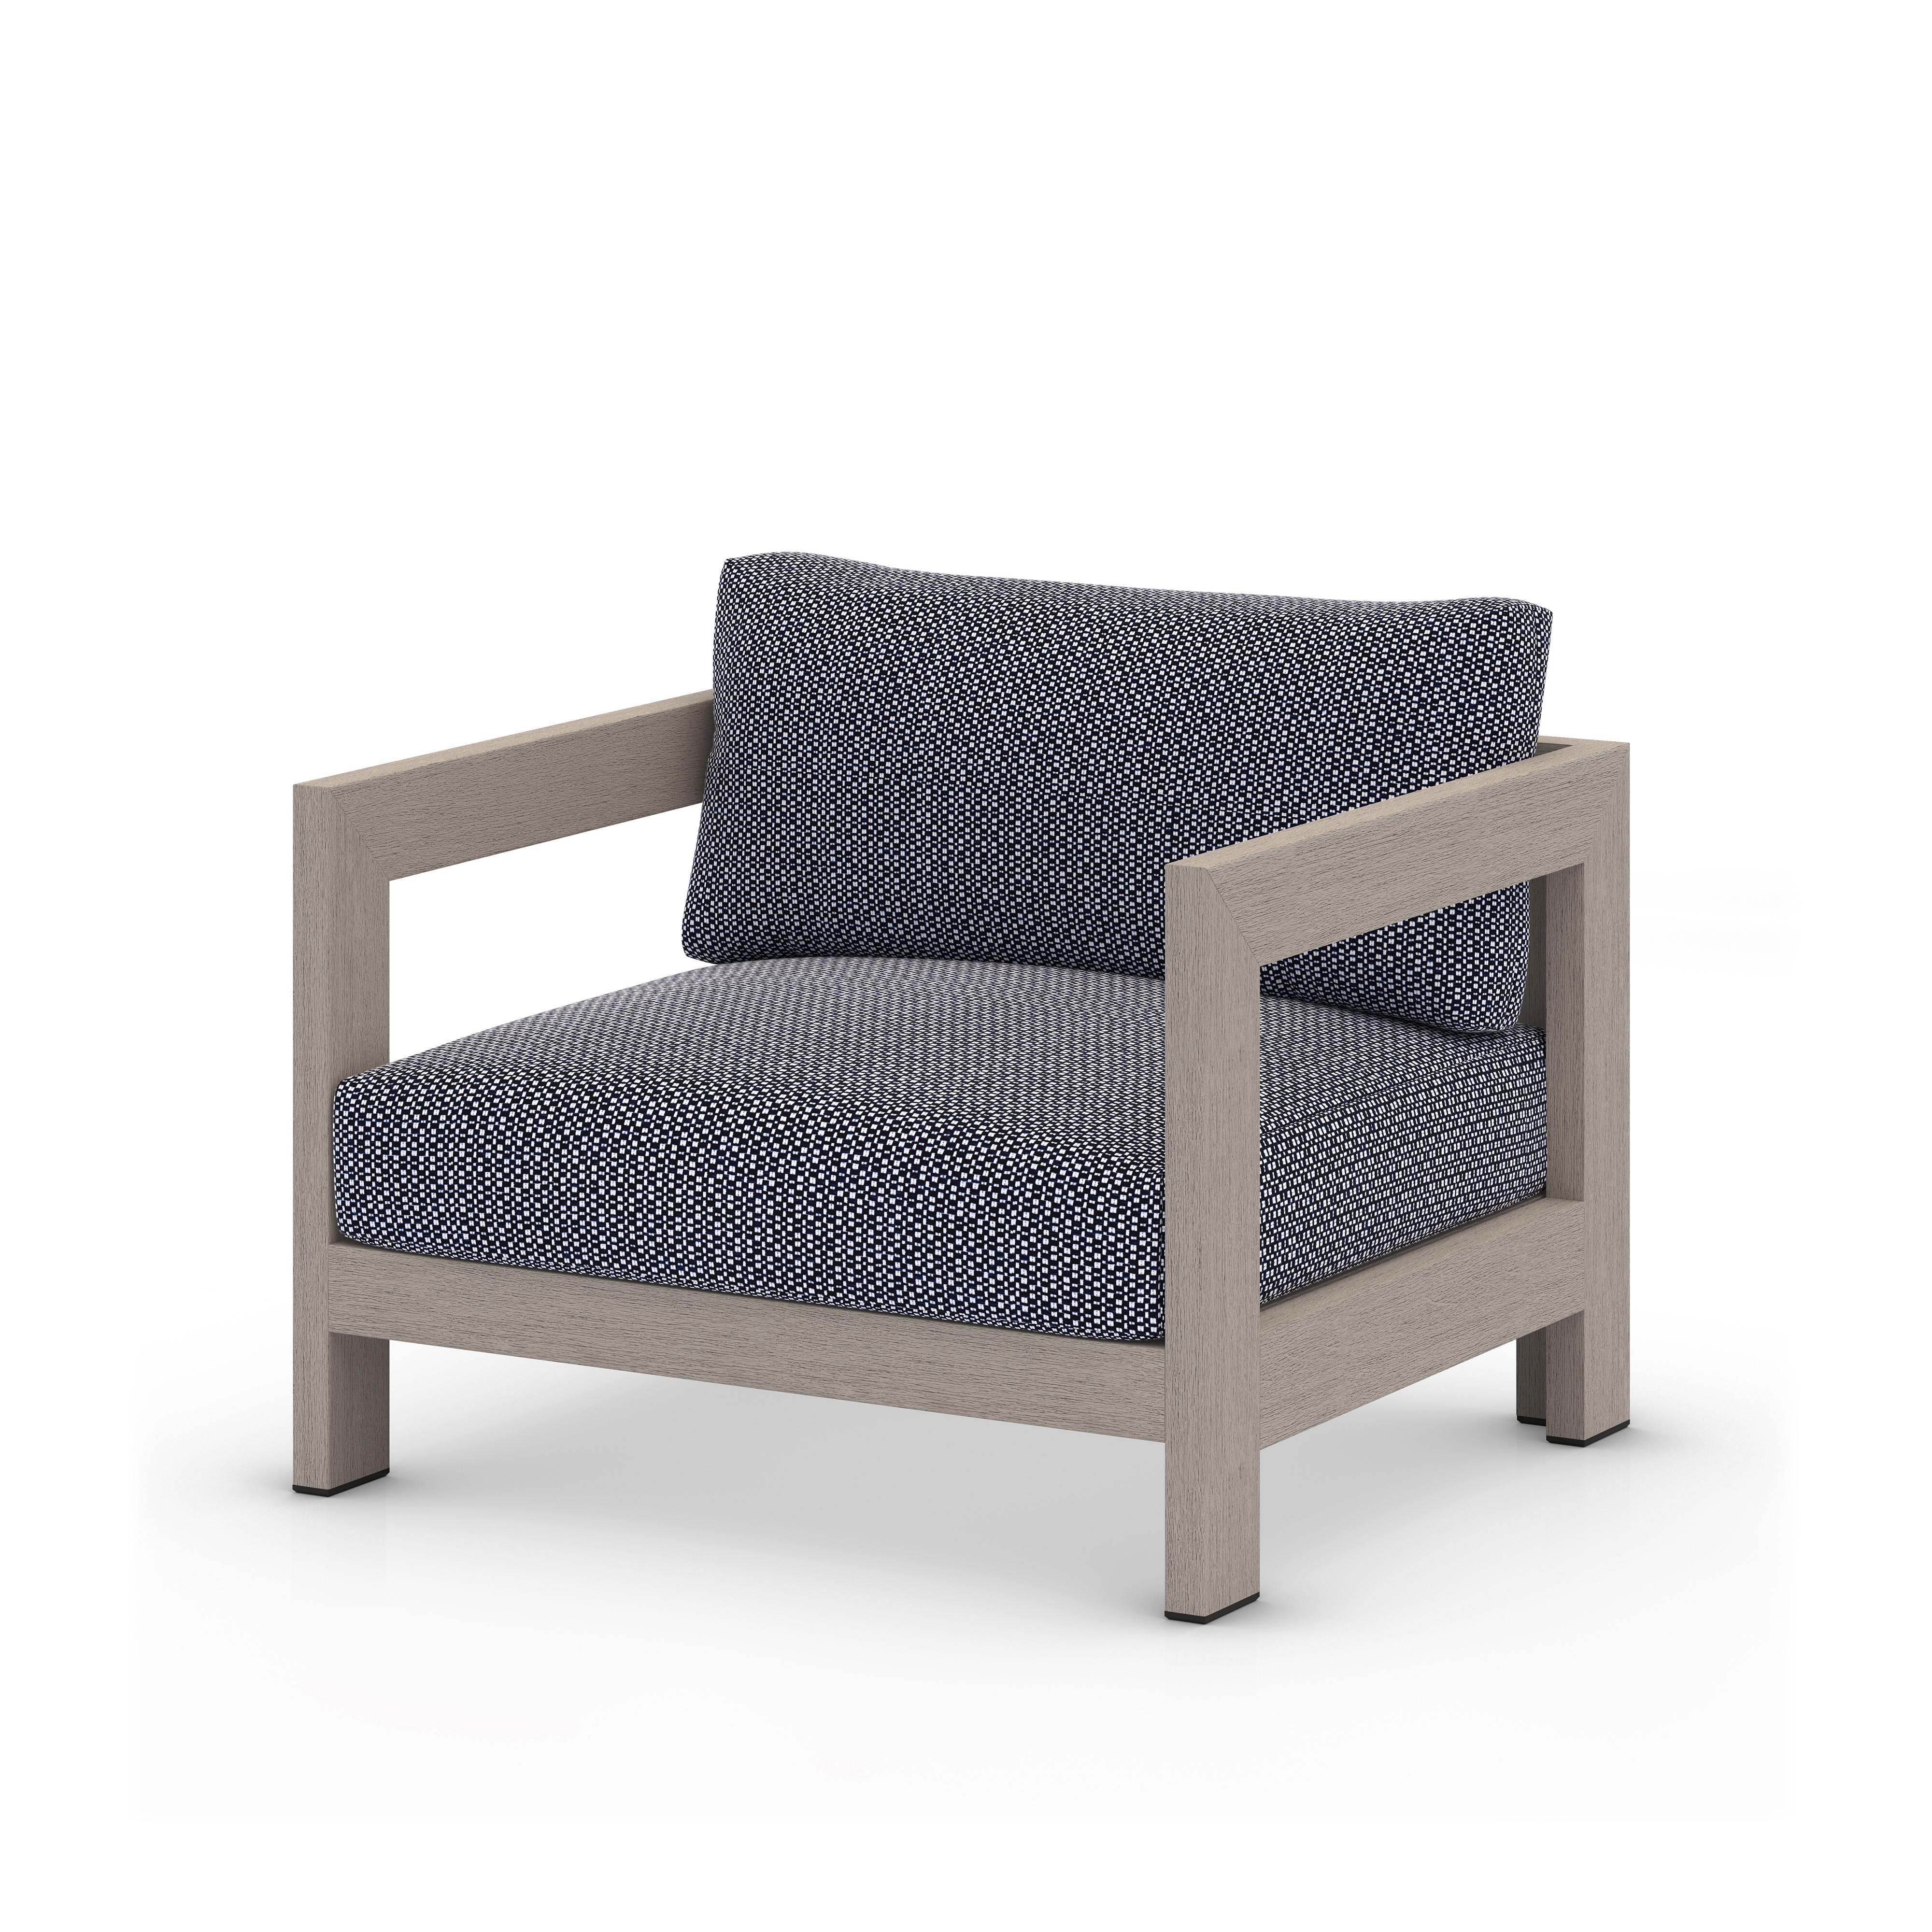 Caro Weathered Gray Outdoor Chair